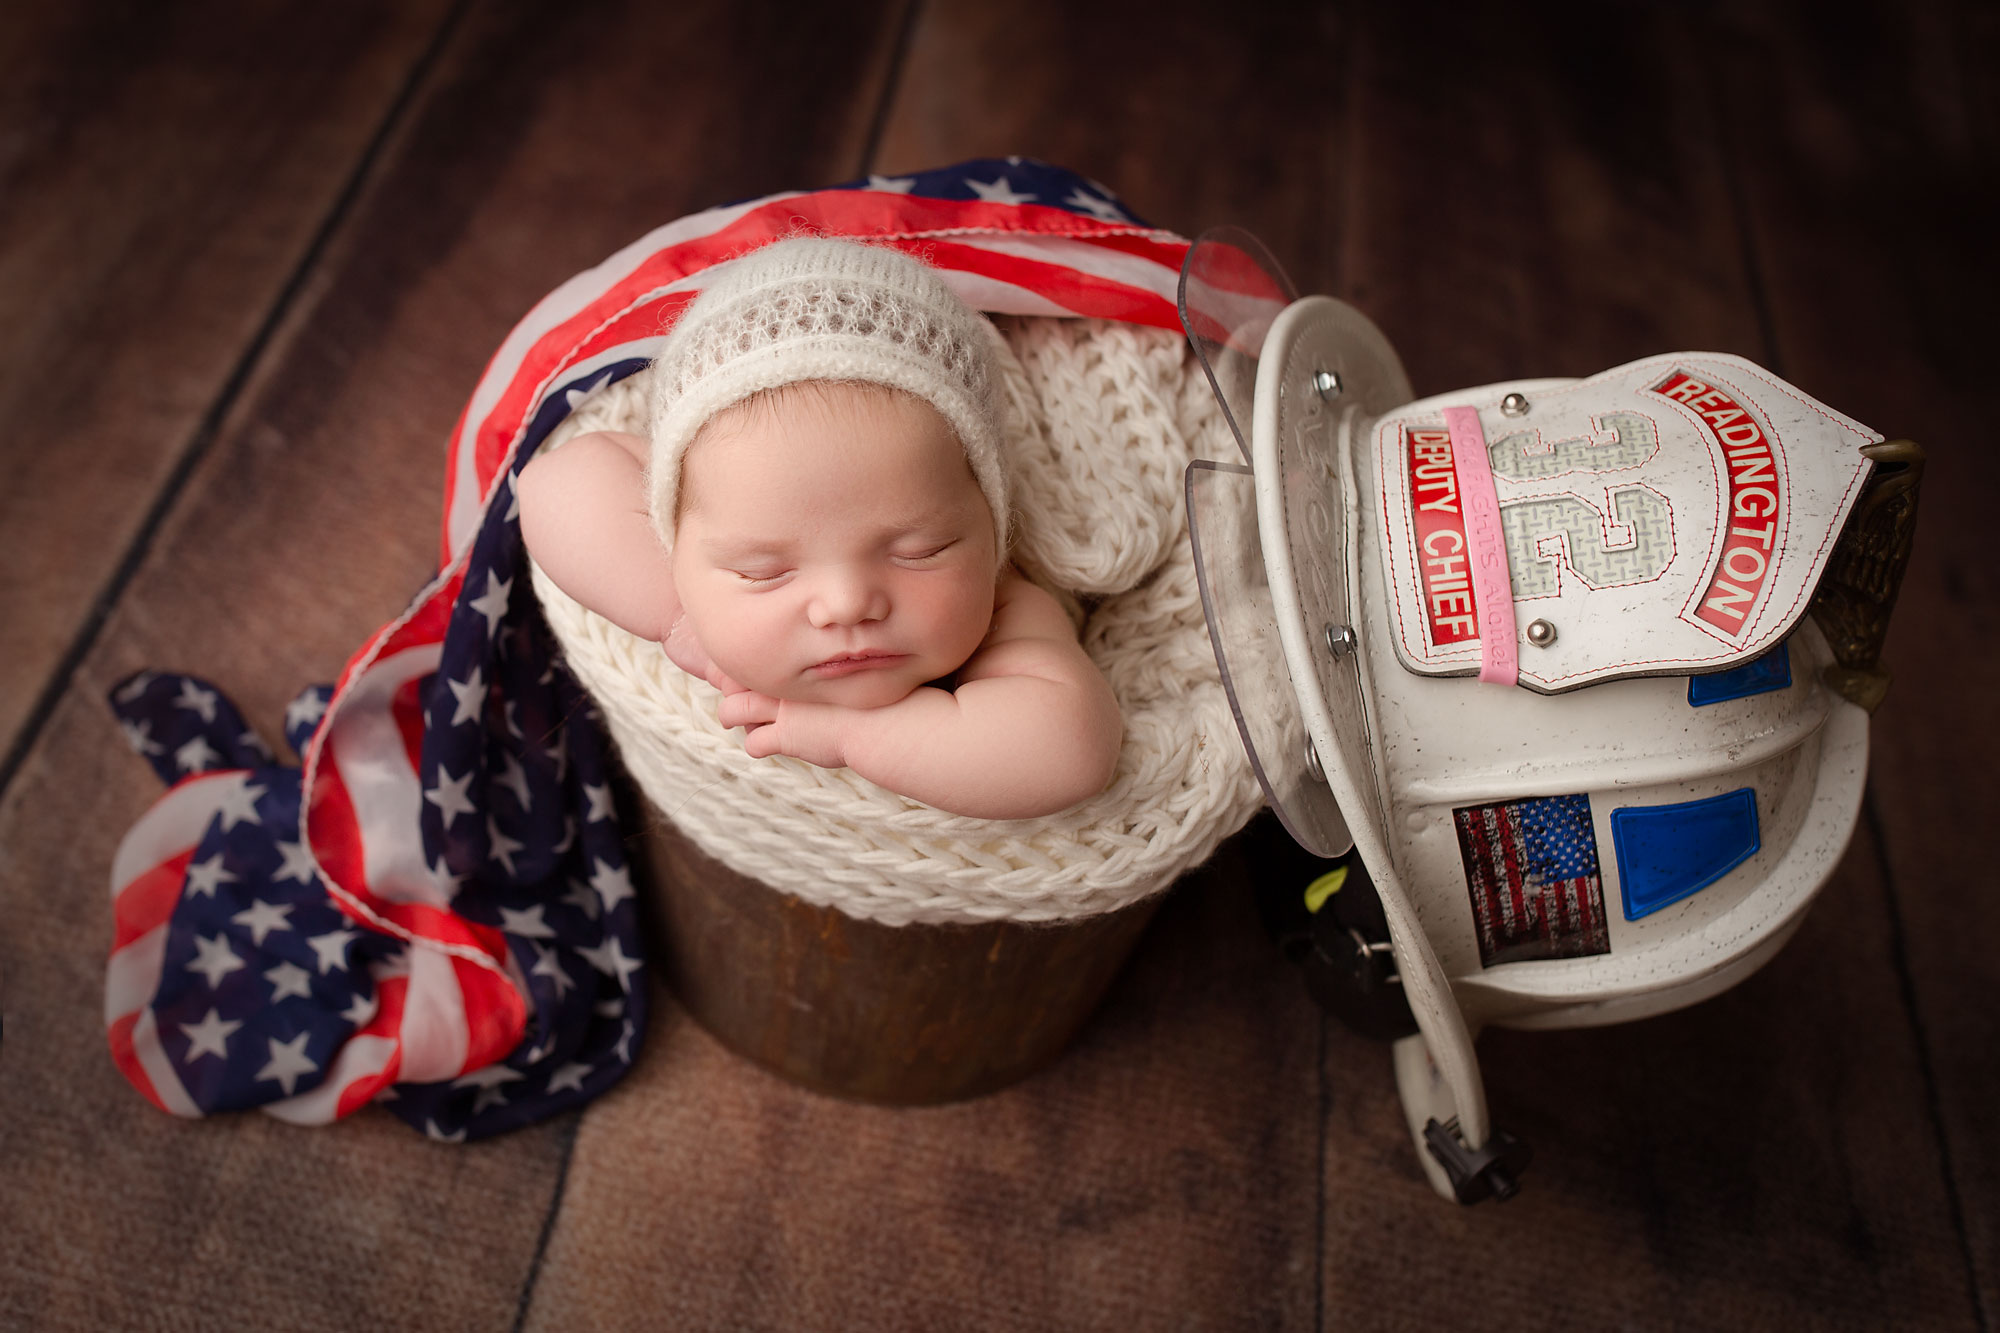 personalized baby pictures new jersey, baby girl with American flag and fireman's helmet